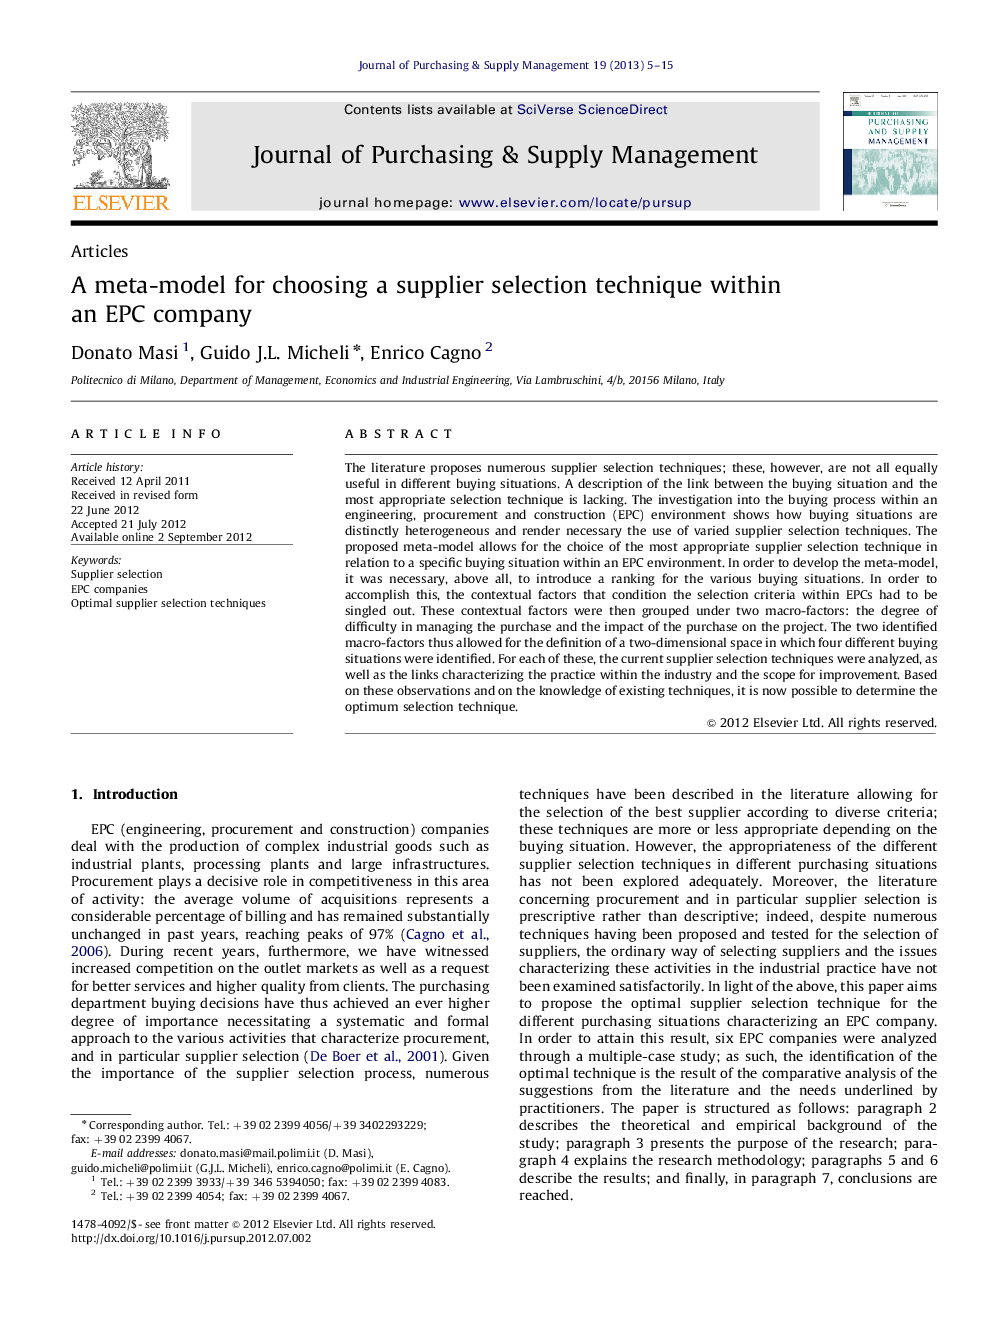 A meta-model for choosing a supplier selection technique within an EPC company